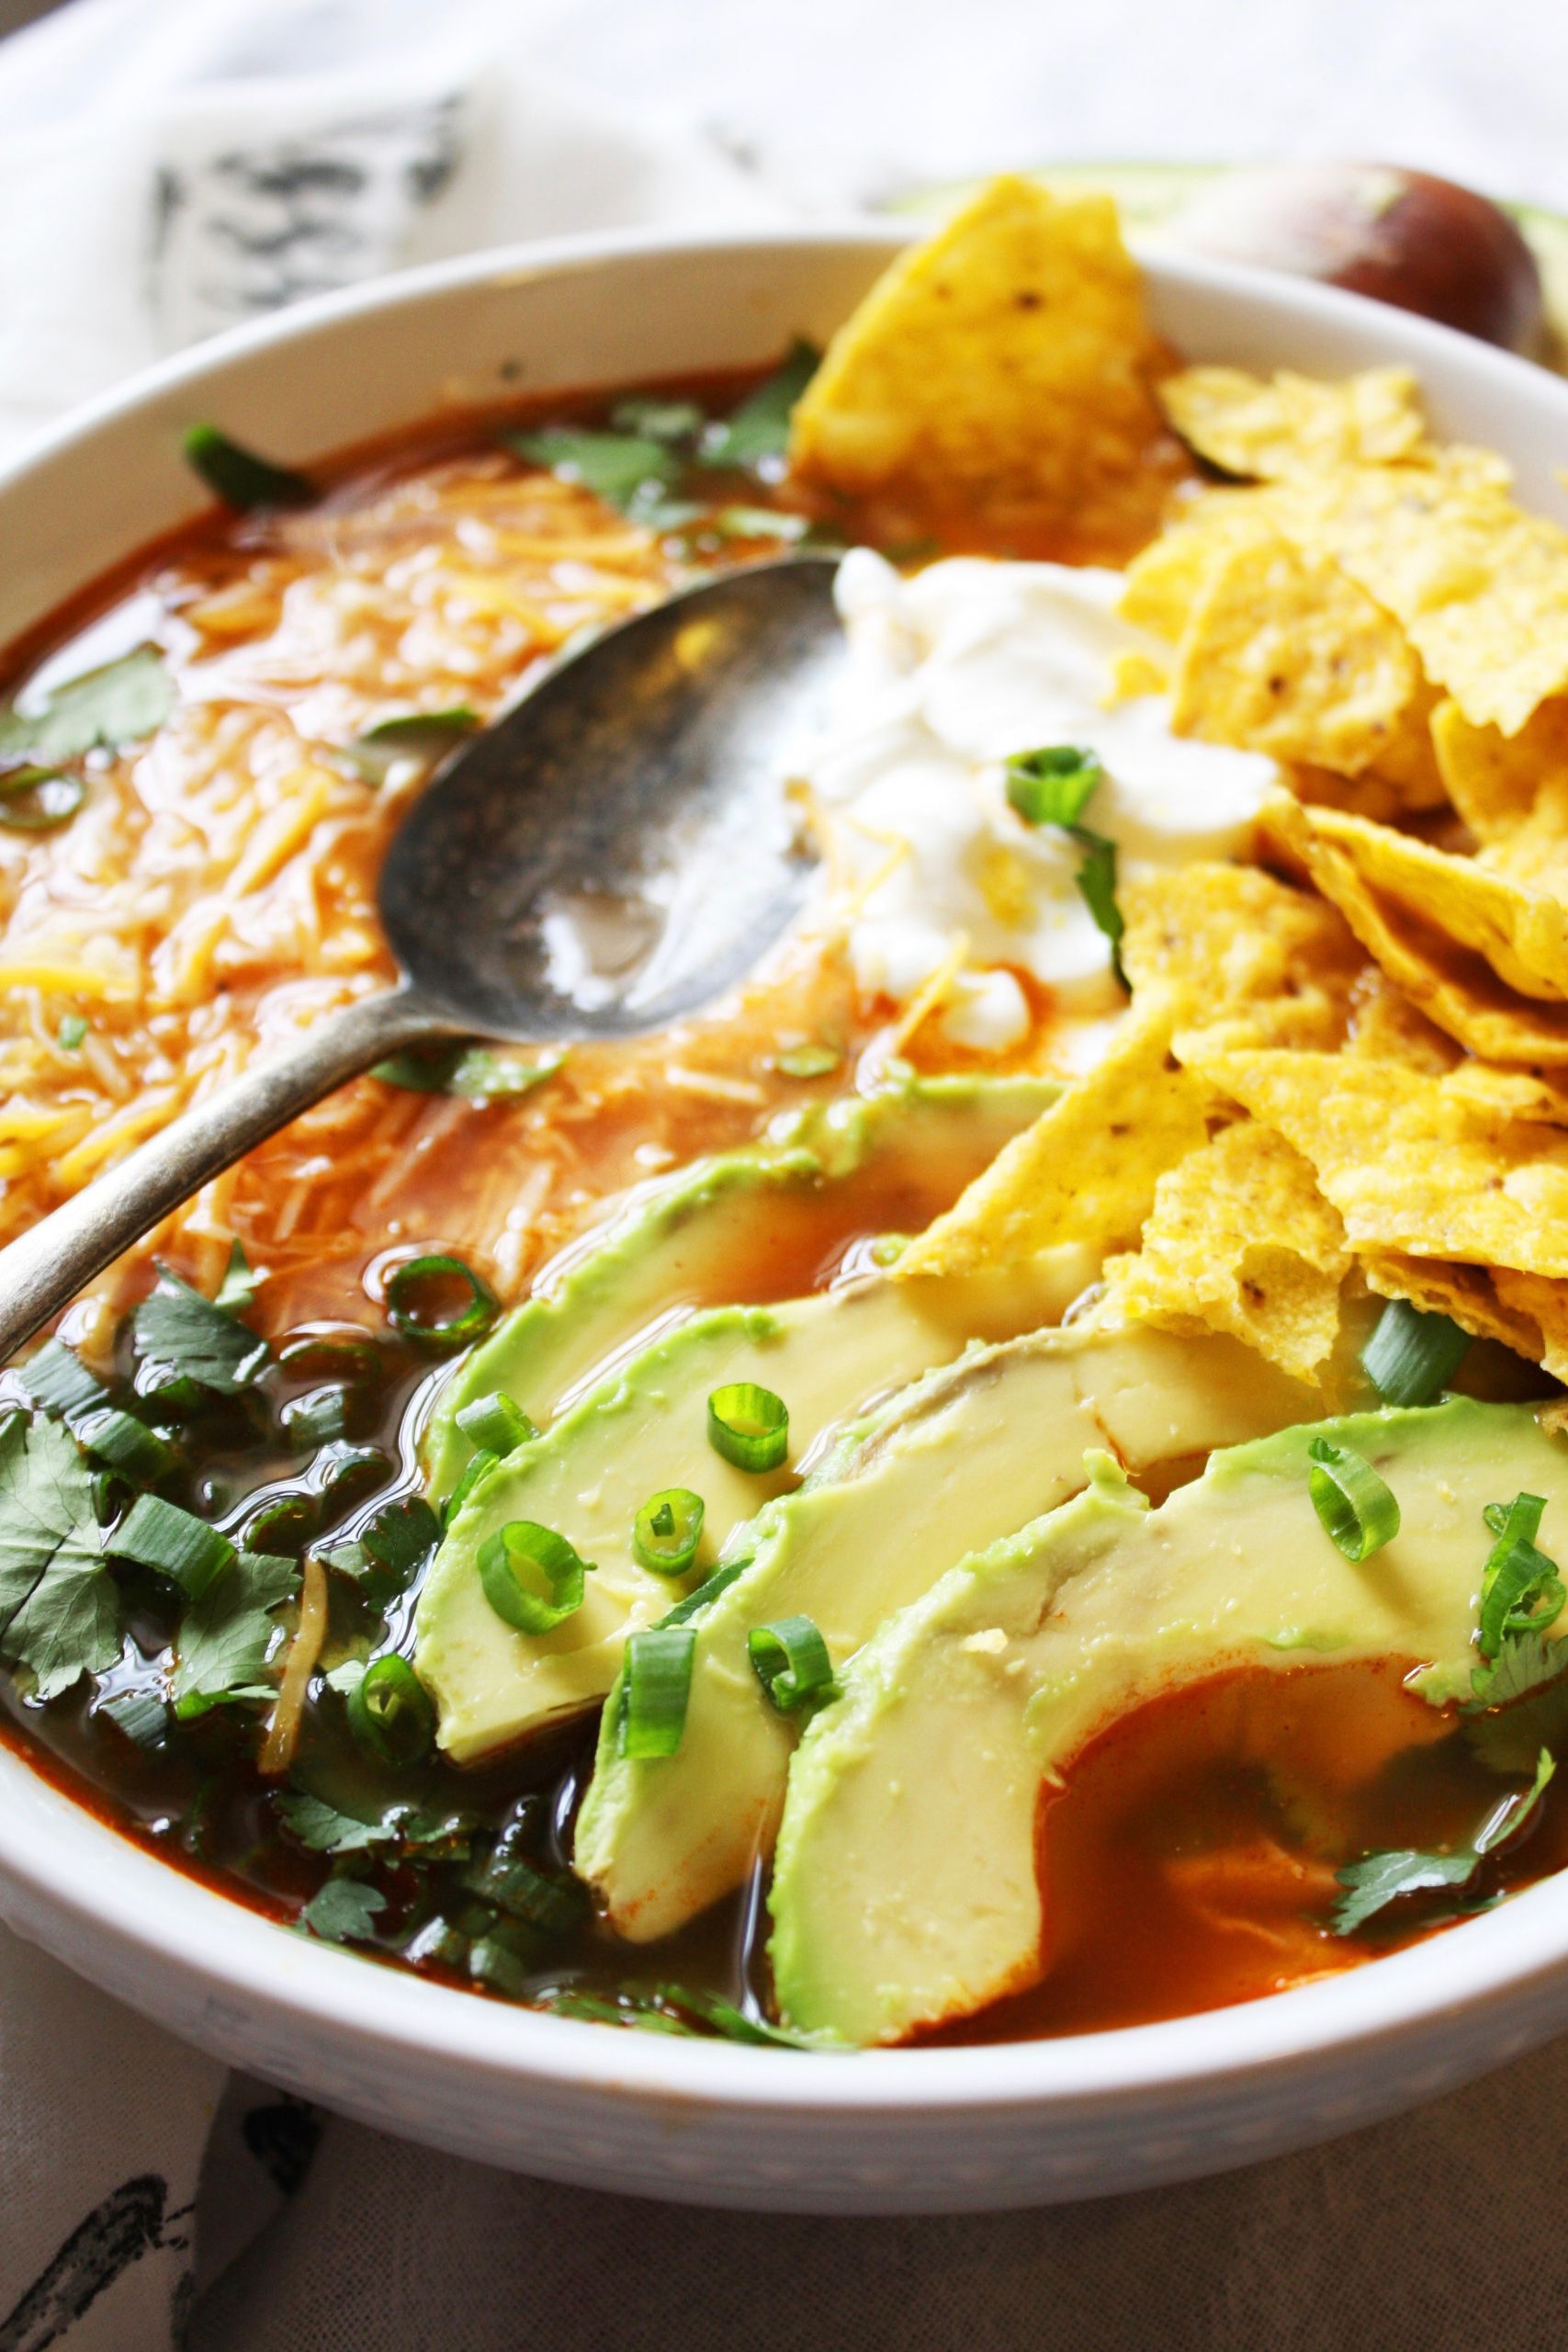 The 20 Best Ideas for Chili's Chicken tortilla soup - Best Recipes ...